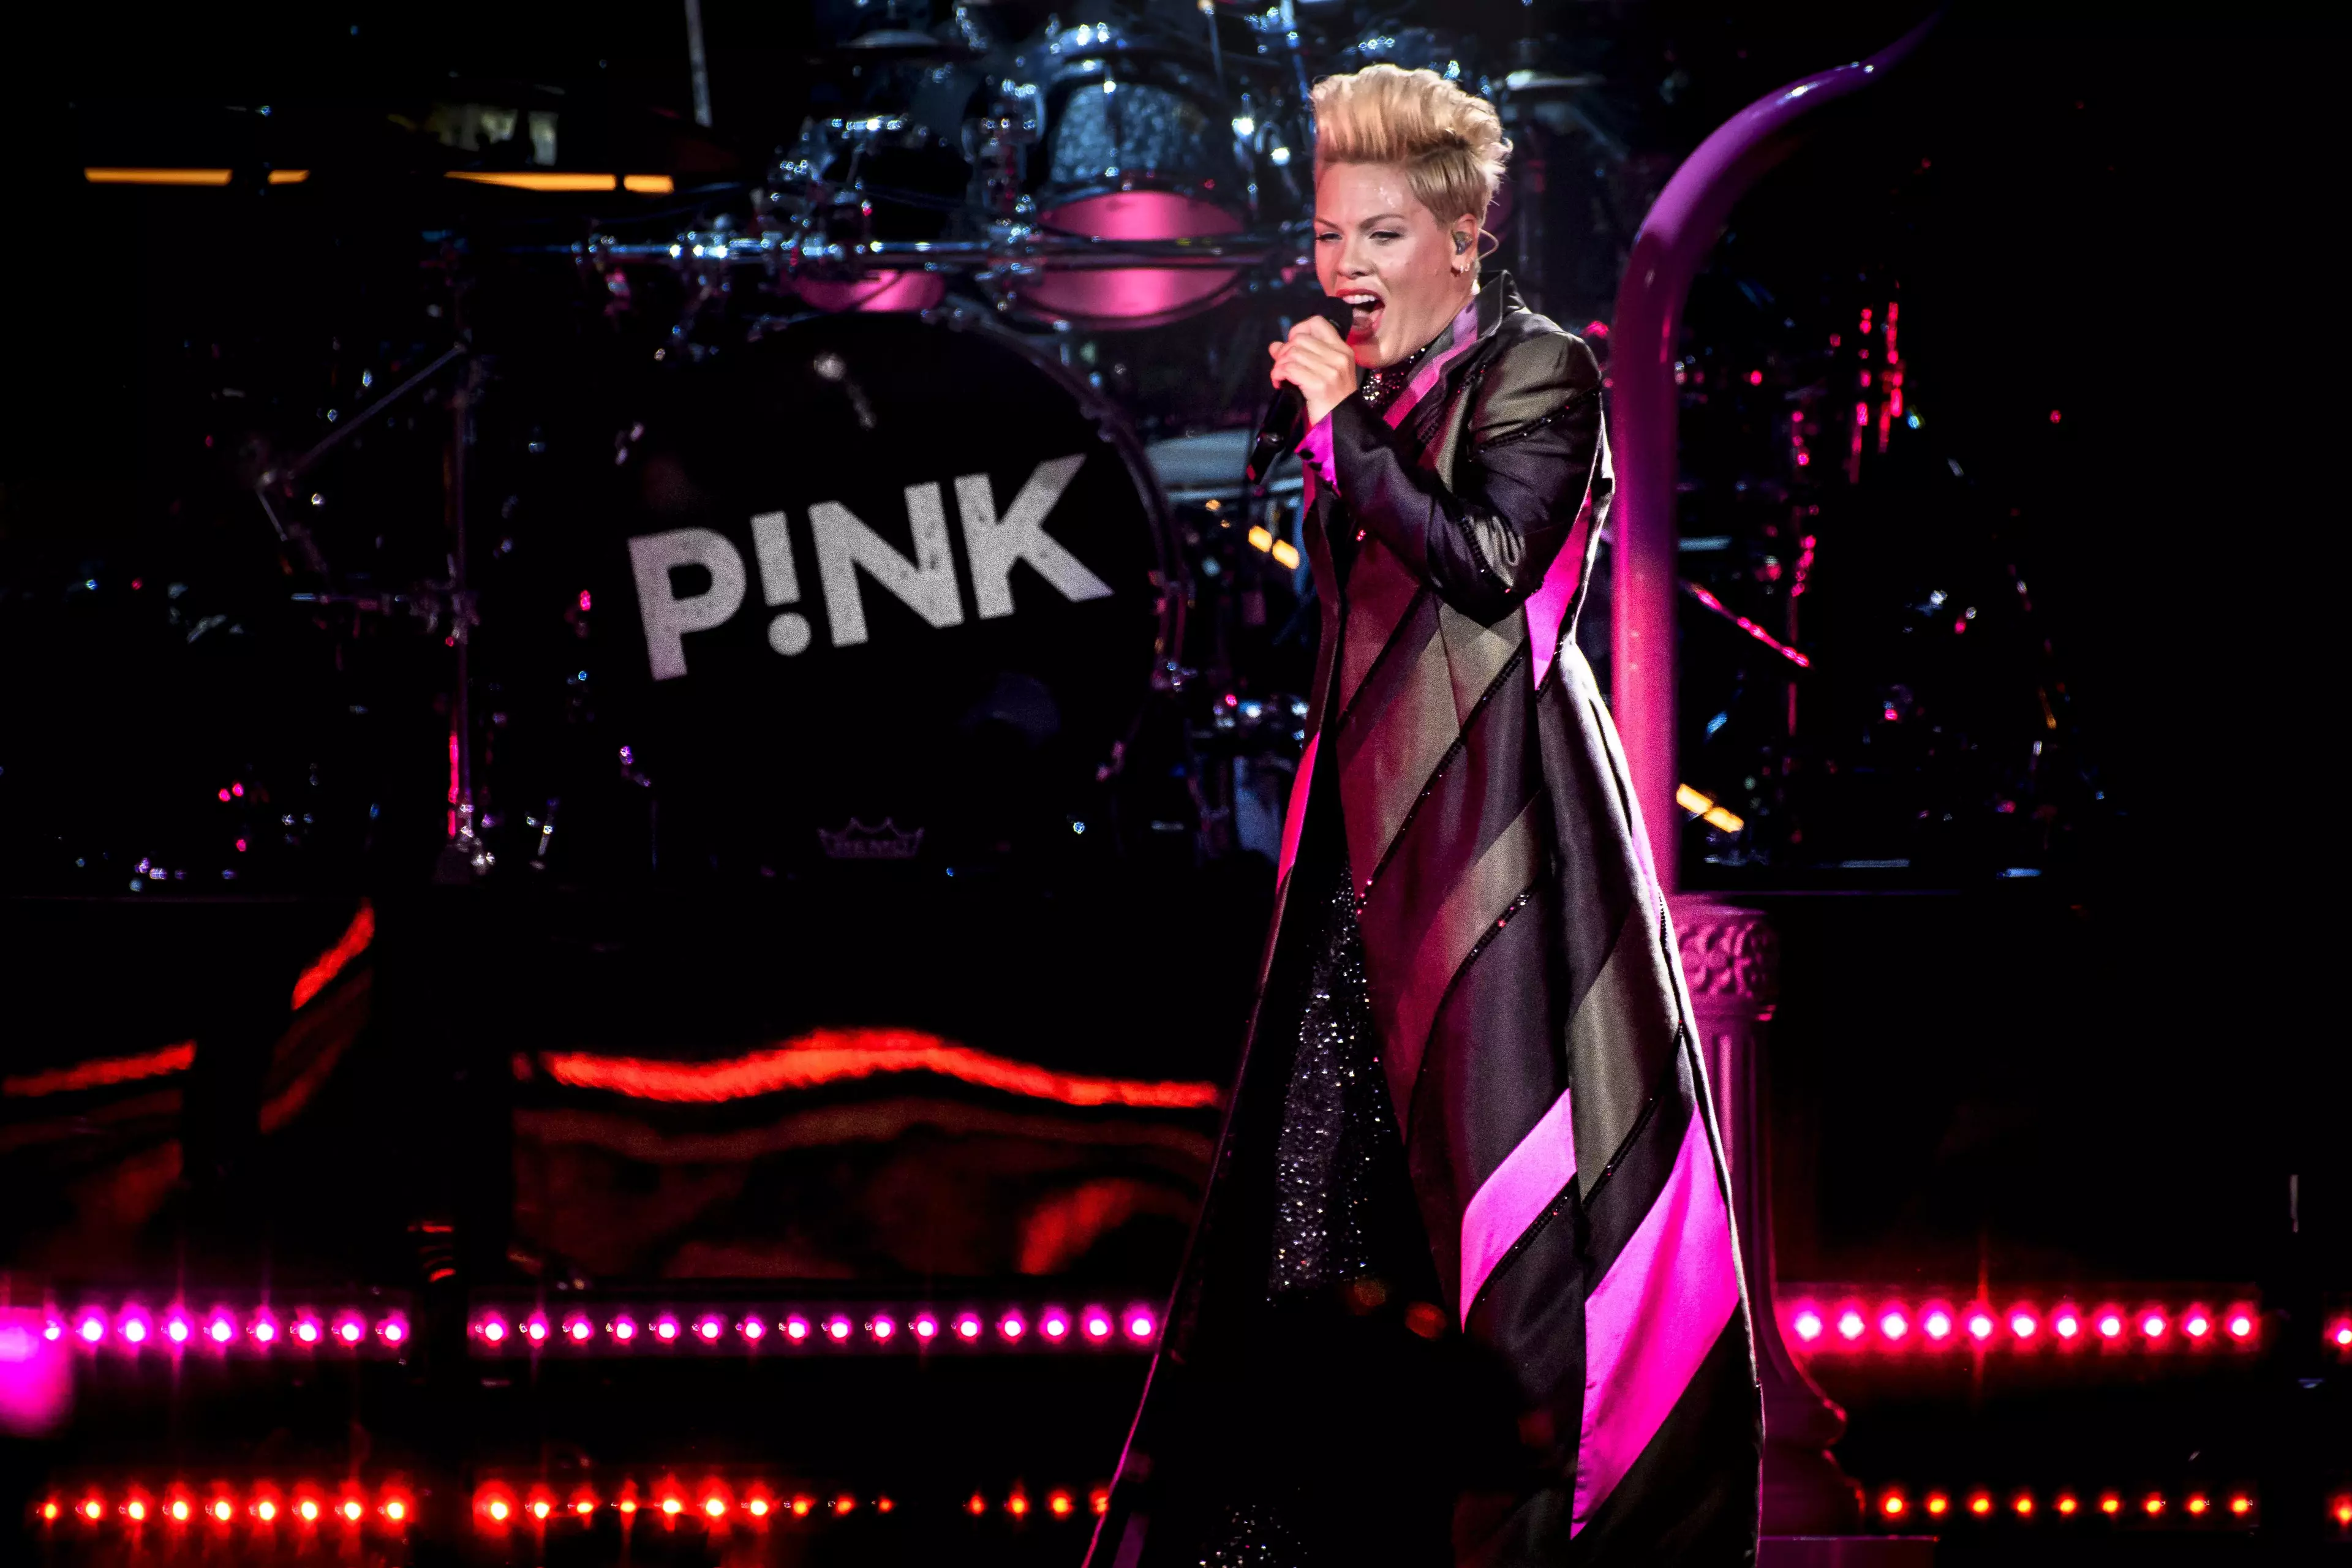 Singer Pink also joined the online protests against the new abortion laws.